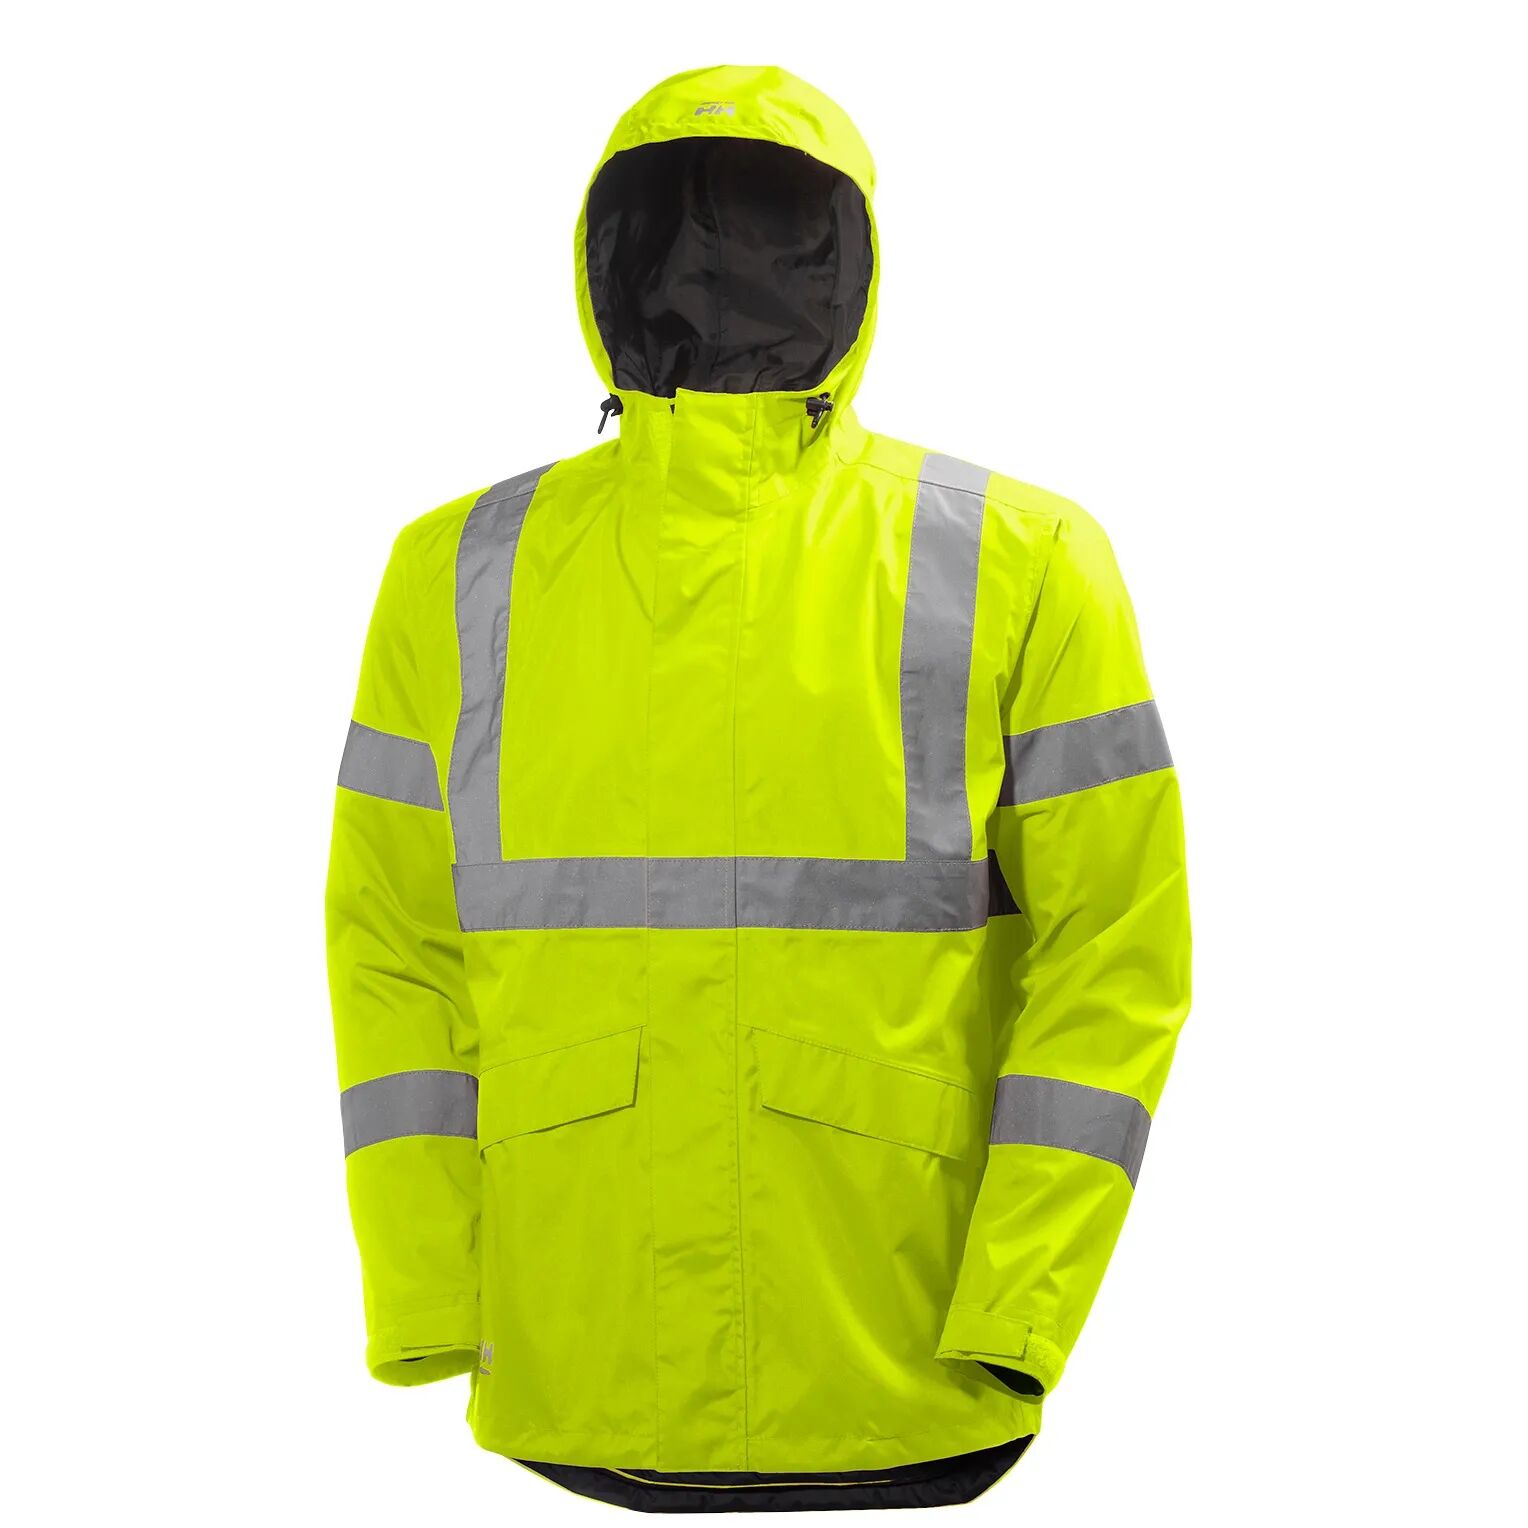 HH Workwear Helly Hansen WorkwearAlta Breathable Protective Shelter Jacket Yellow XL